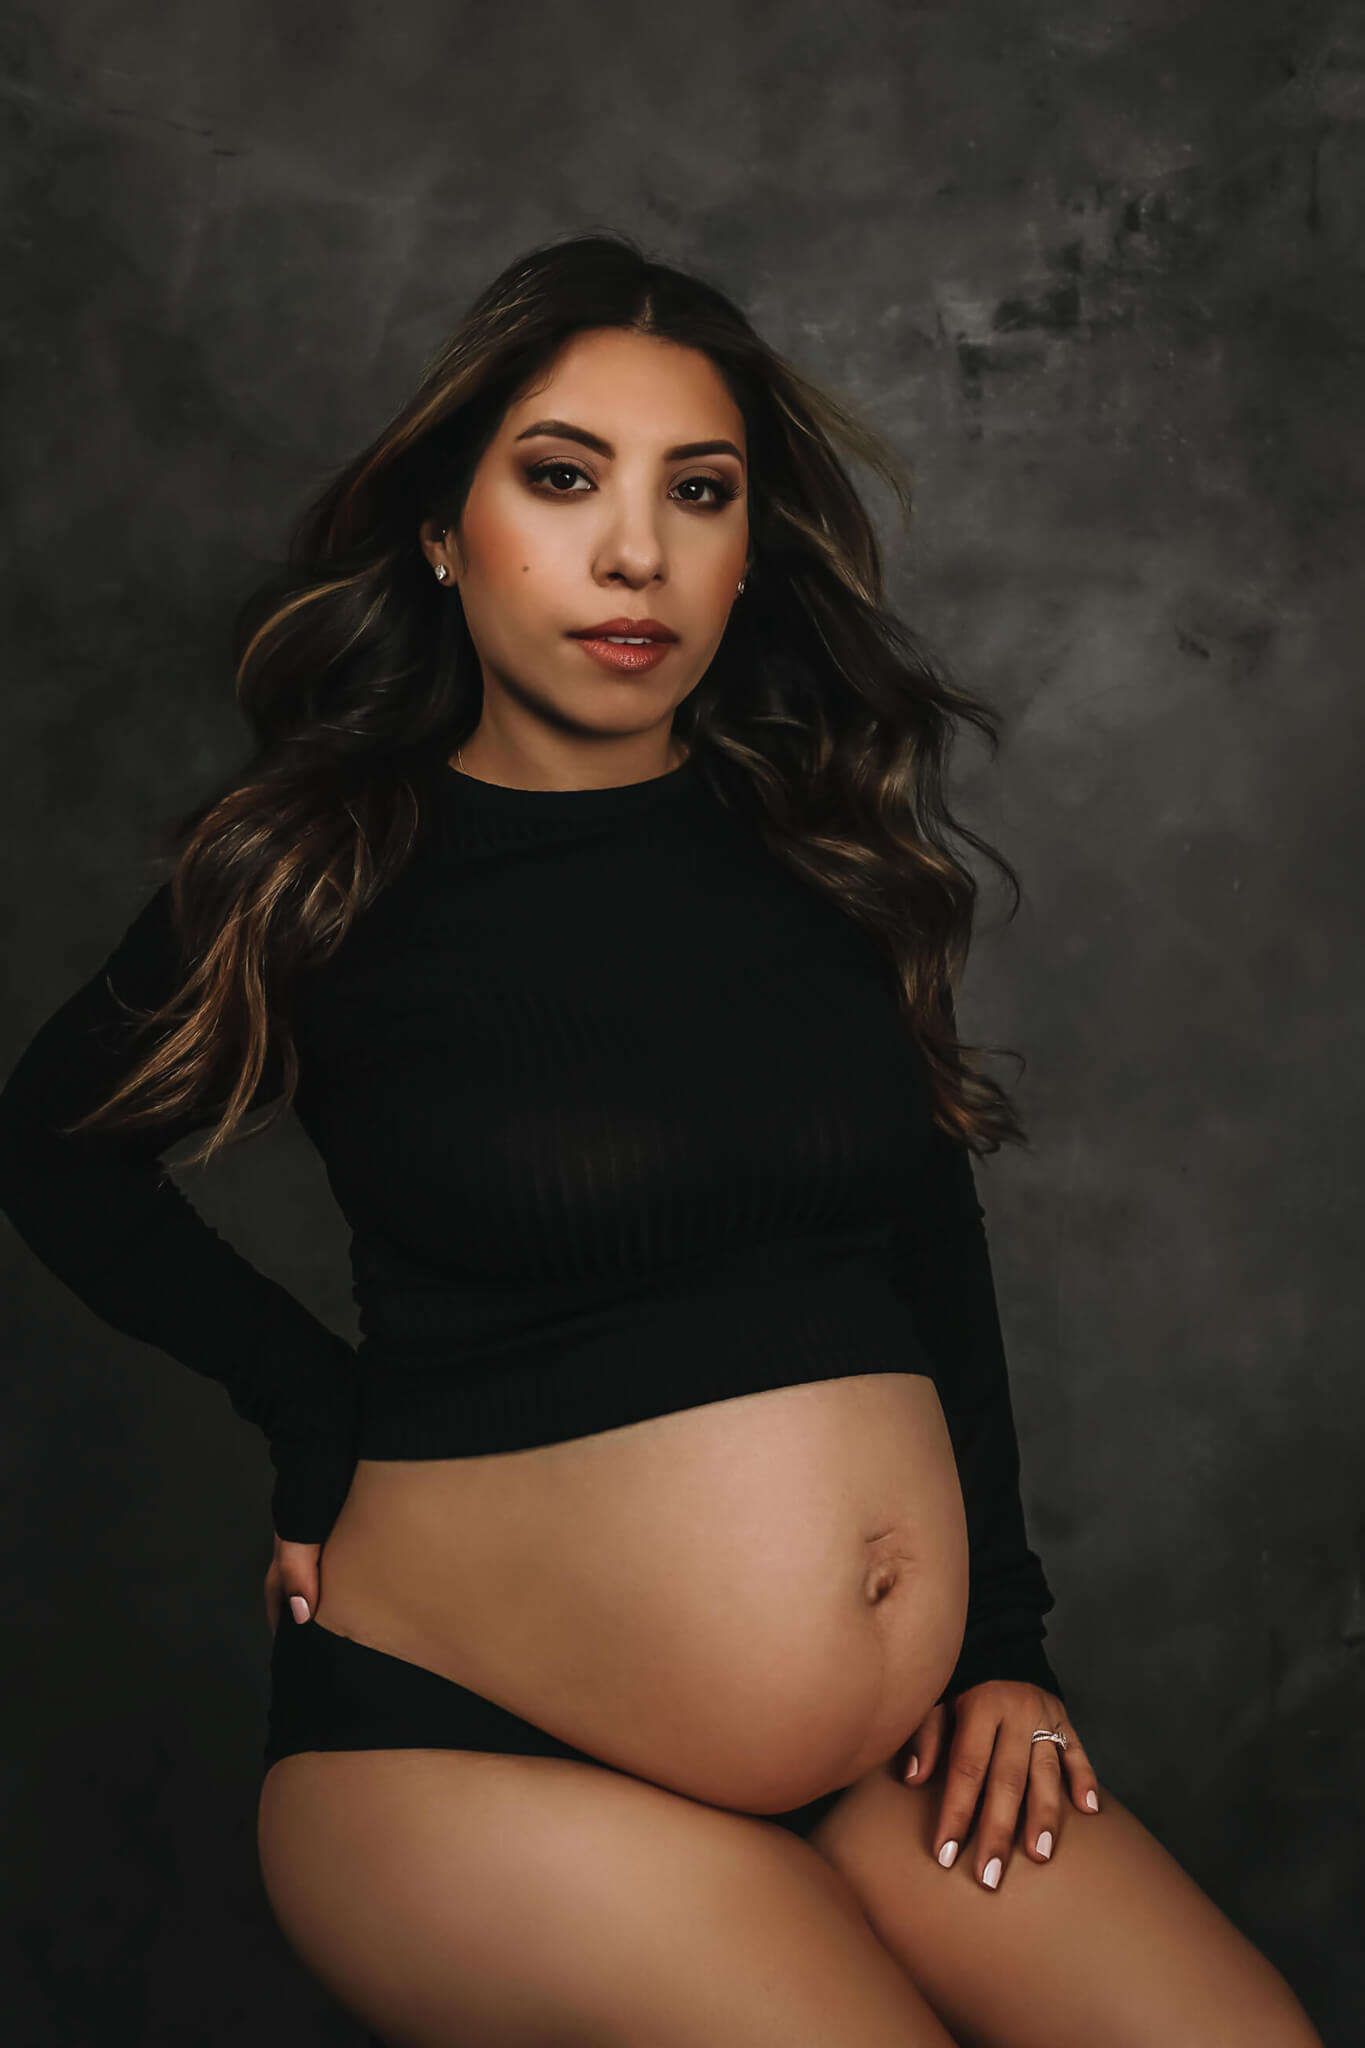 A woman in black underwear and top sits on a stool in a studio with bump exposed after meeting austin midwives